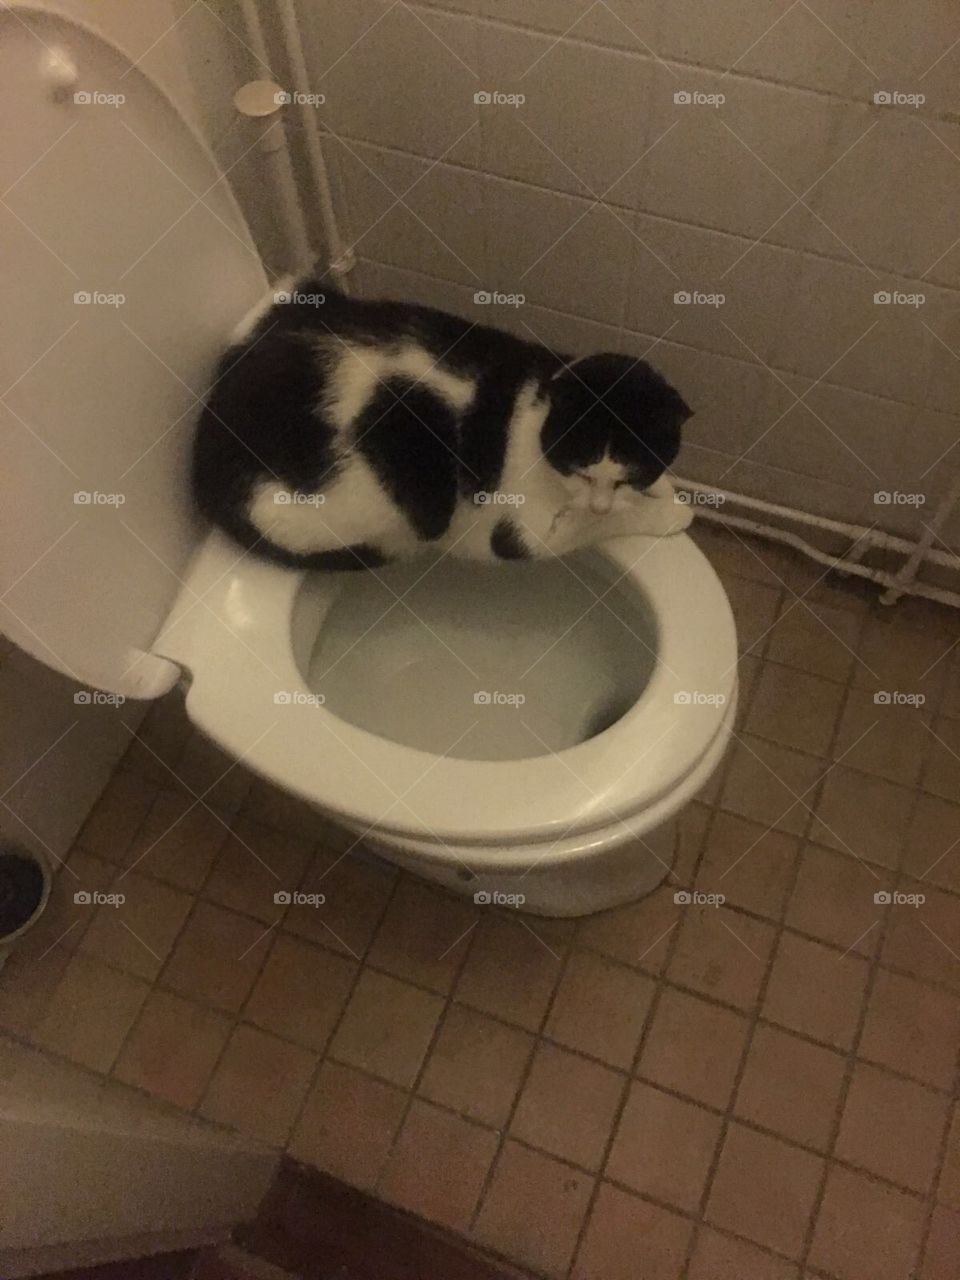 Black and white cat on the toilet